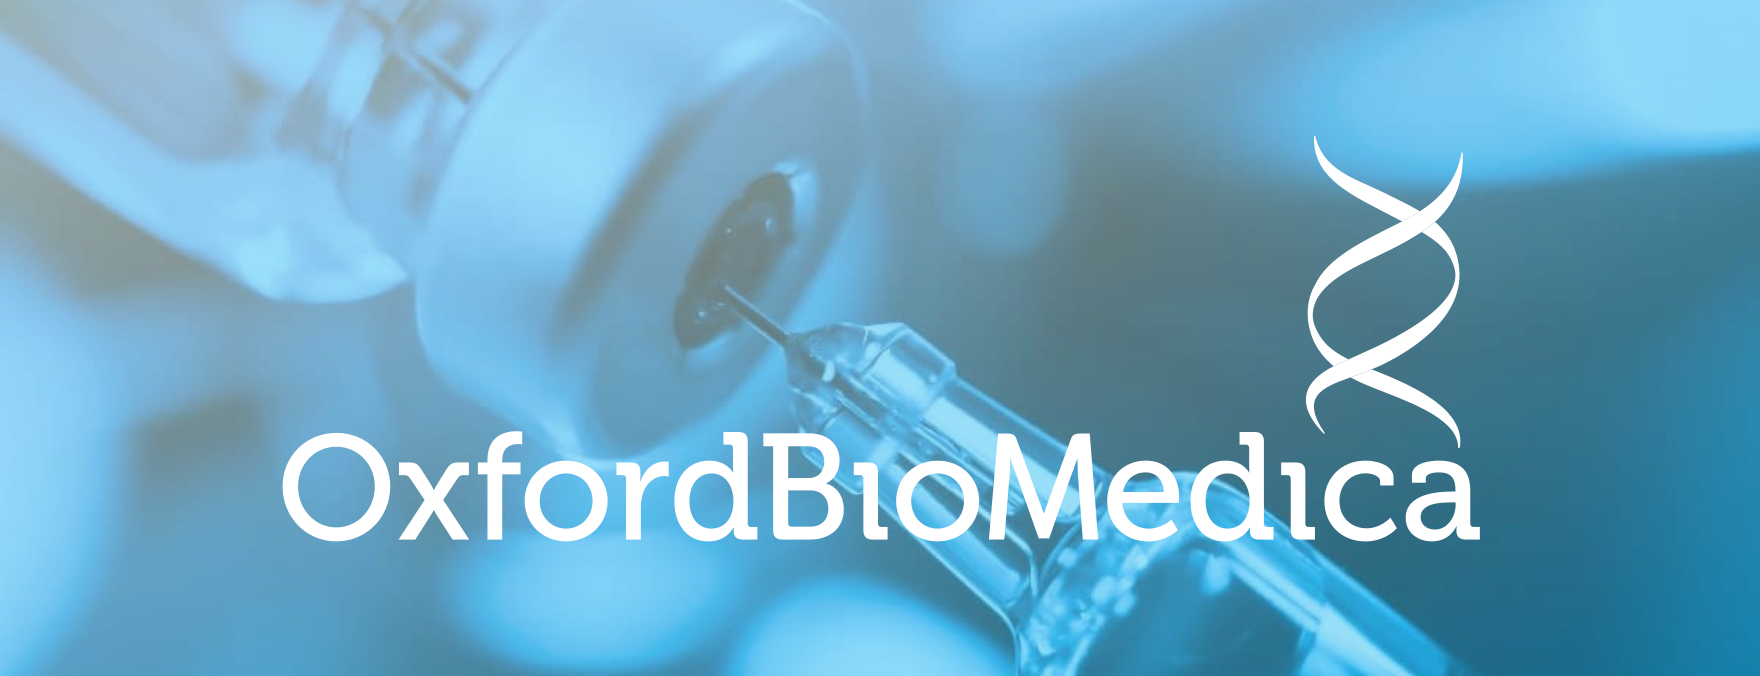 Close up shot of medicine being pulled into a syringe watermarked with a blue tint and Oxford Biomedica's logo on top